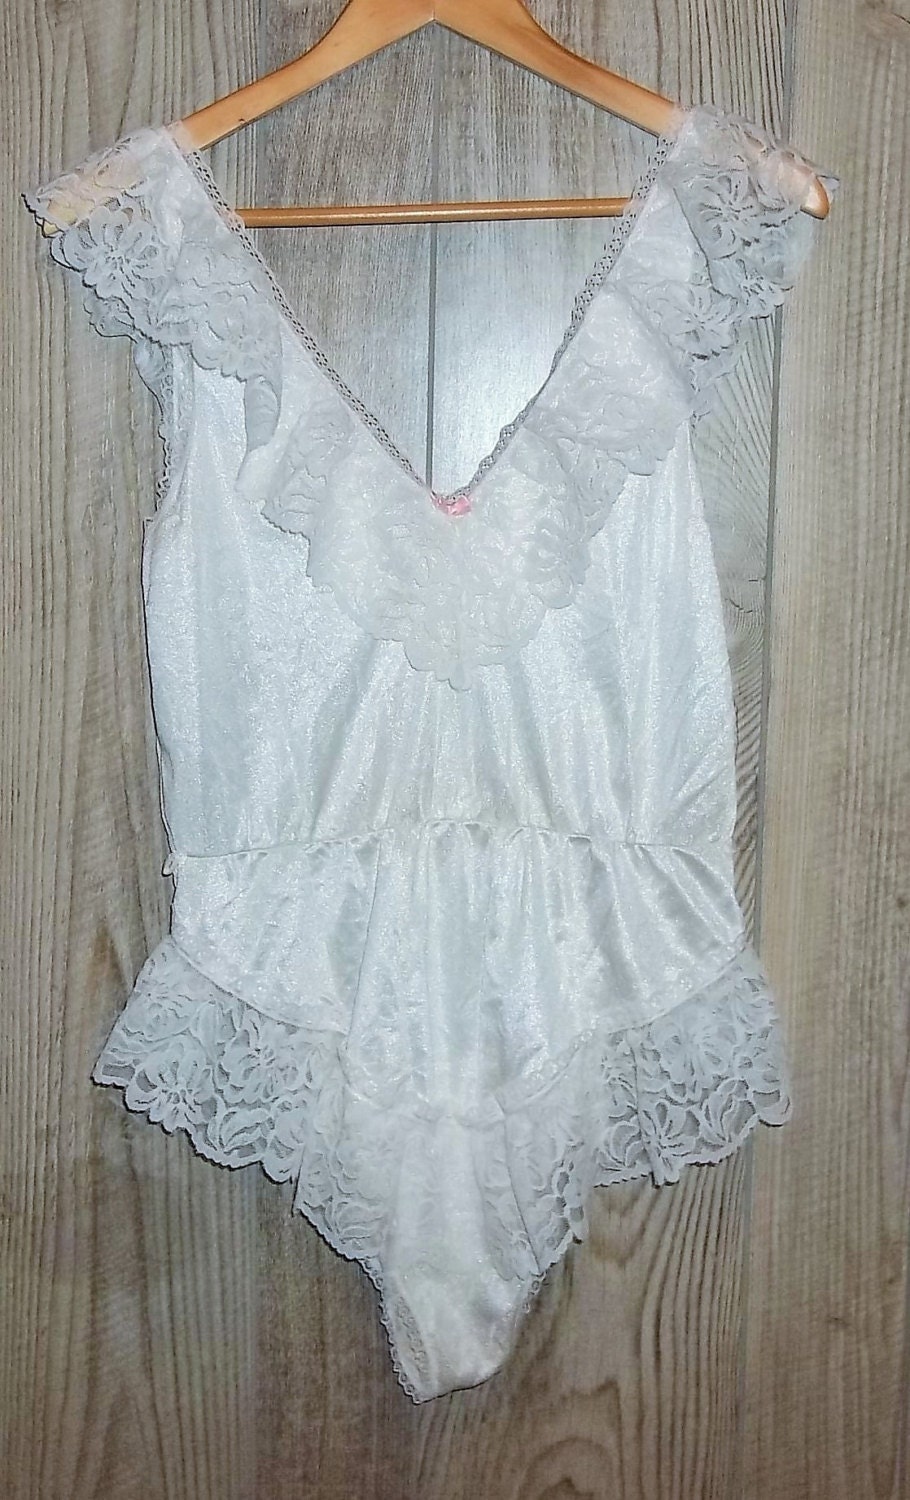 Vintage 80s Alana Gale White Teddy L Pink Accents Lace Romper